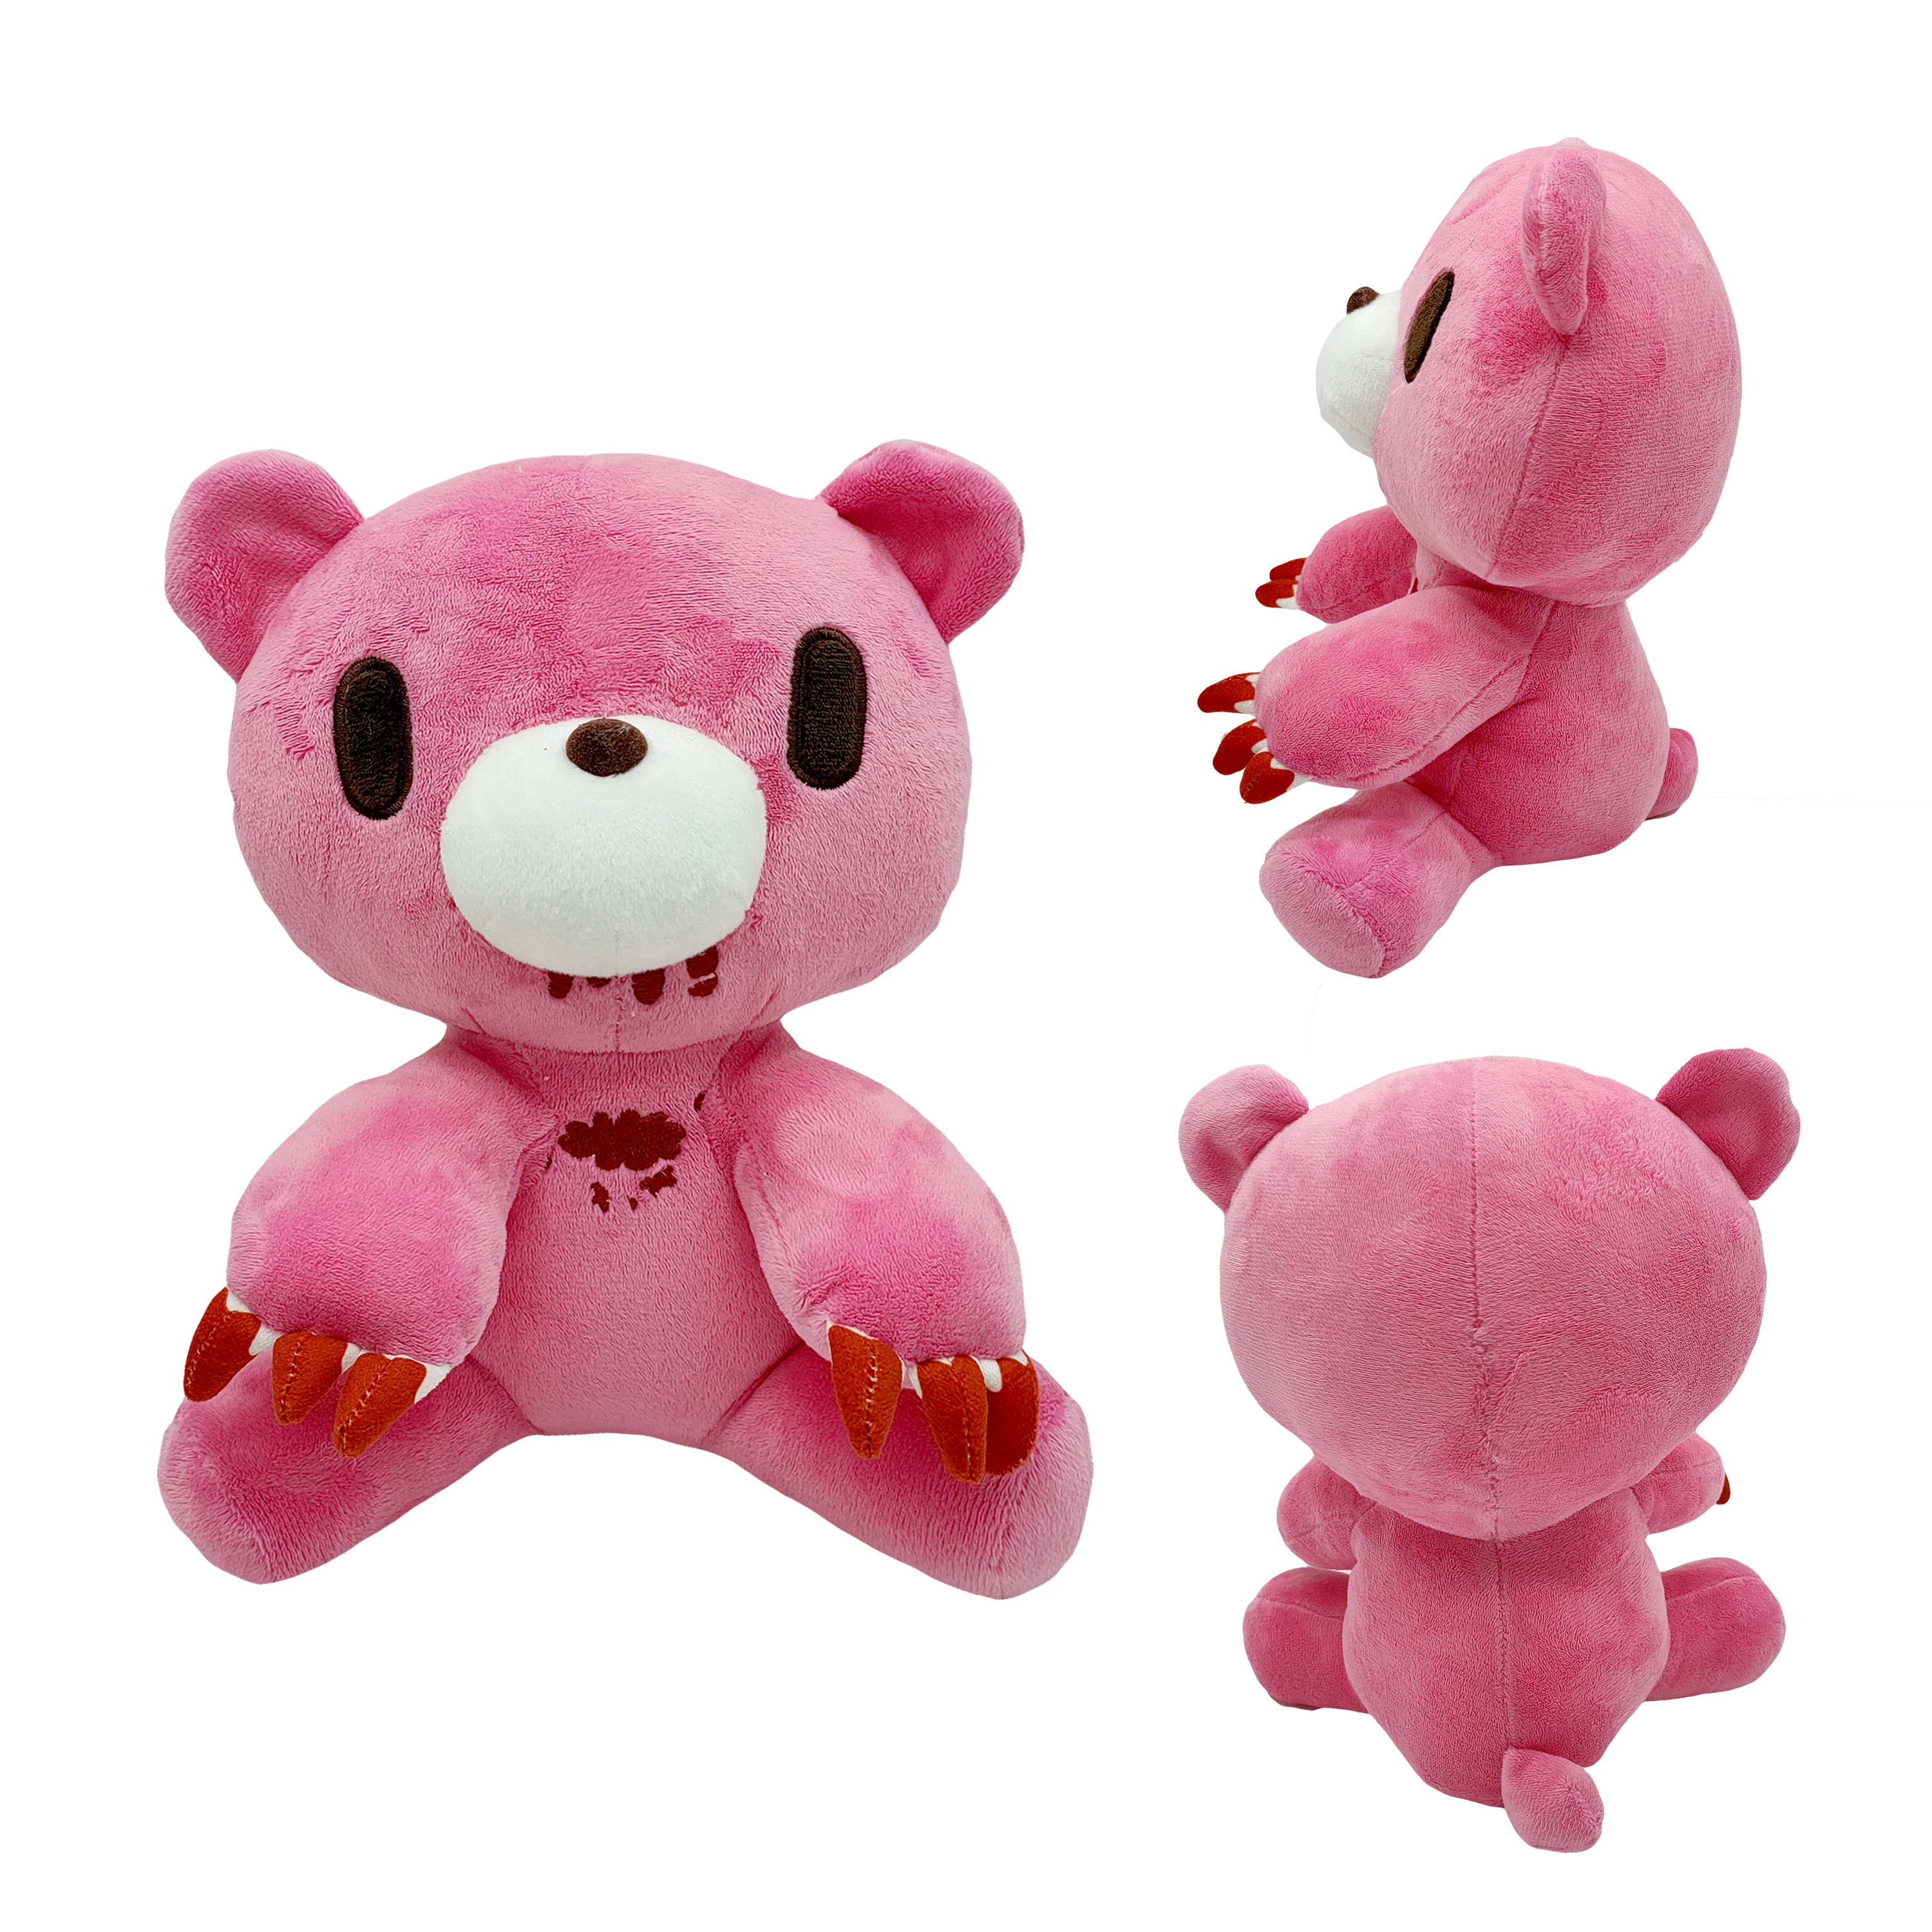 24CM Gloomy Bear and Gloomy Plush Toy Pink Pig Stuffed Doll Plush Toy Children Gift Toy Wholesale